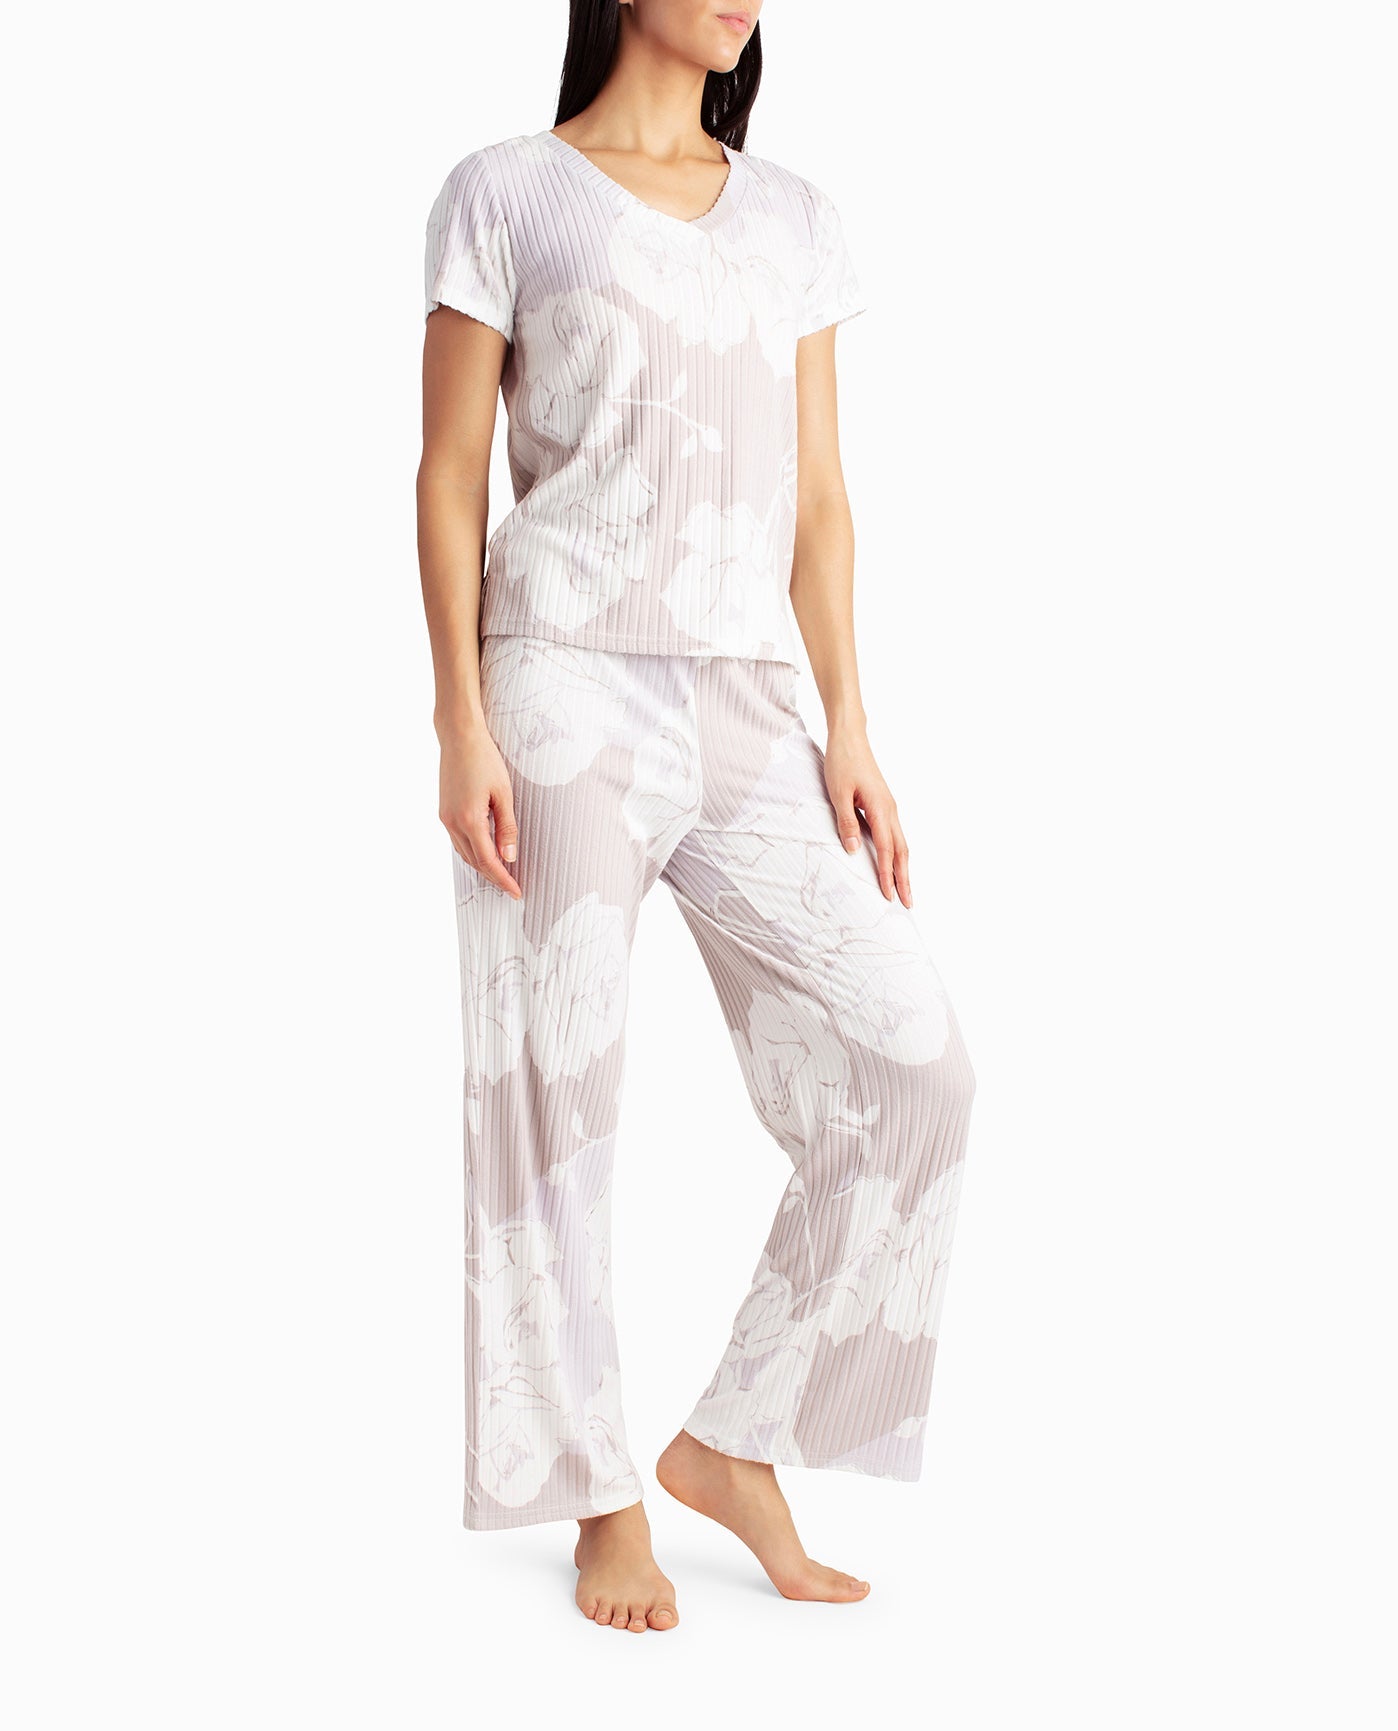 SIDE OF RIBBED CROPPED V-NECK AND OPEN PANT TWO-PIECE SLEEPWEAR SET | Morning Fog